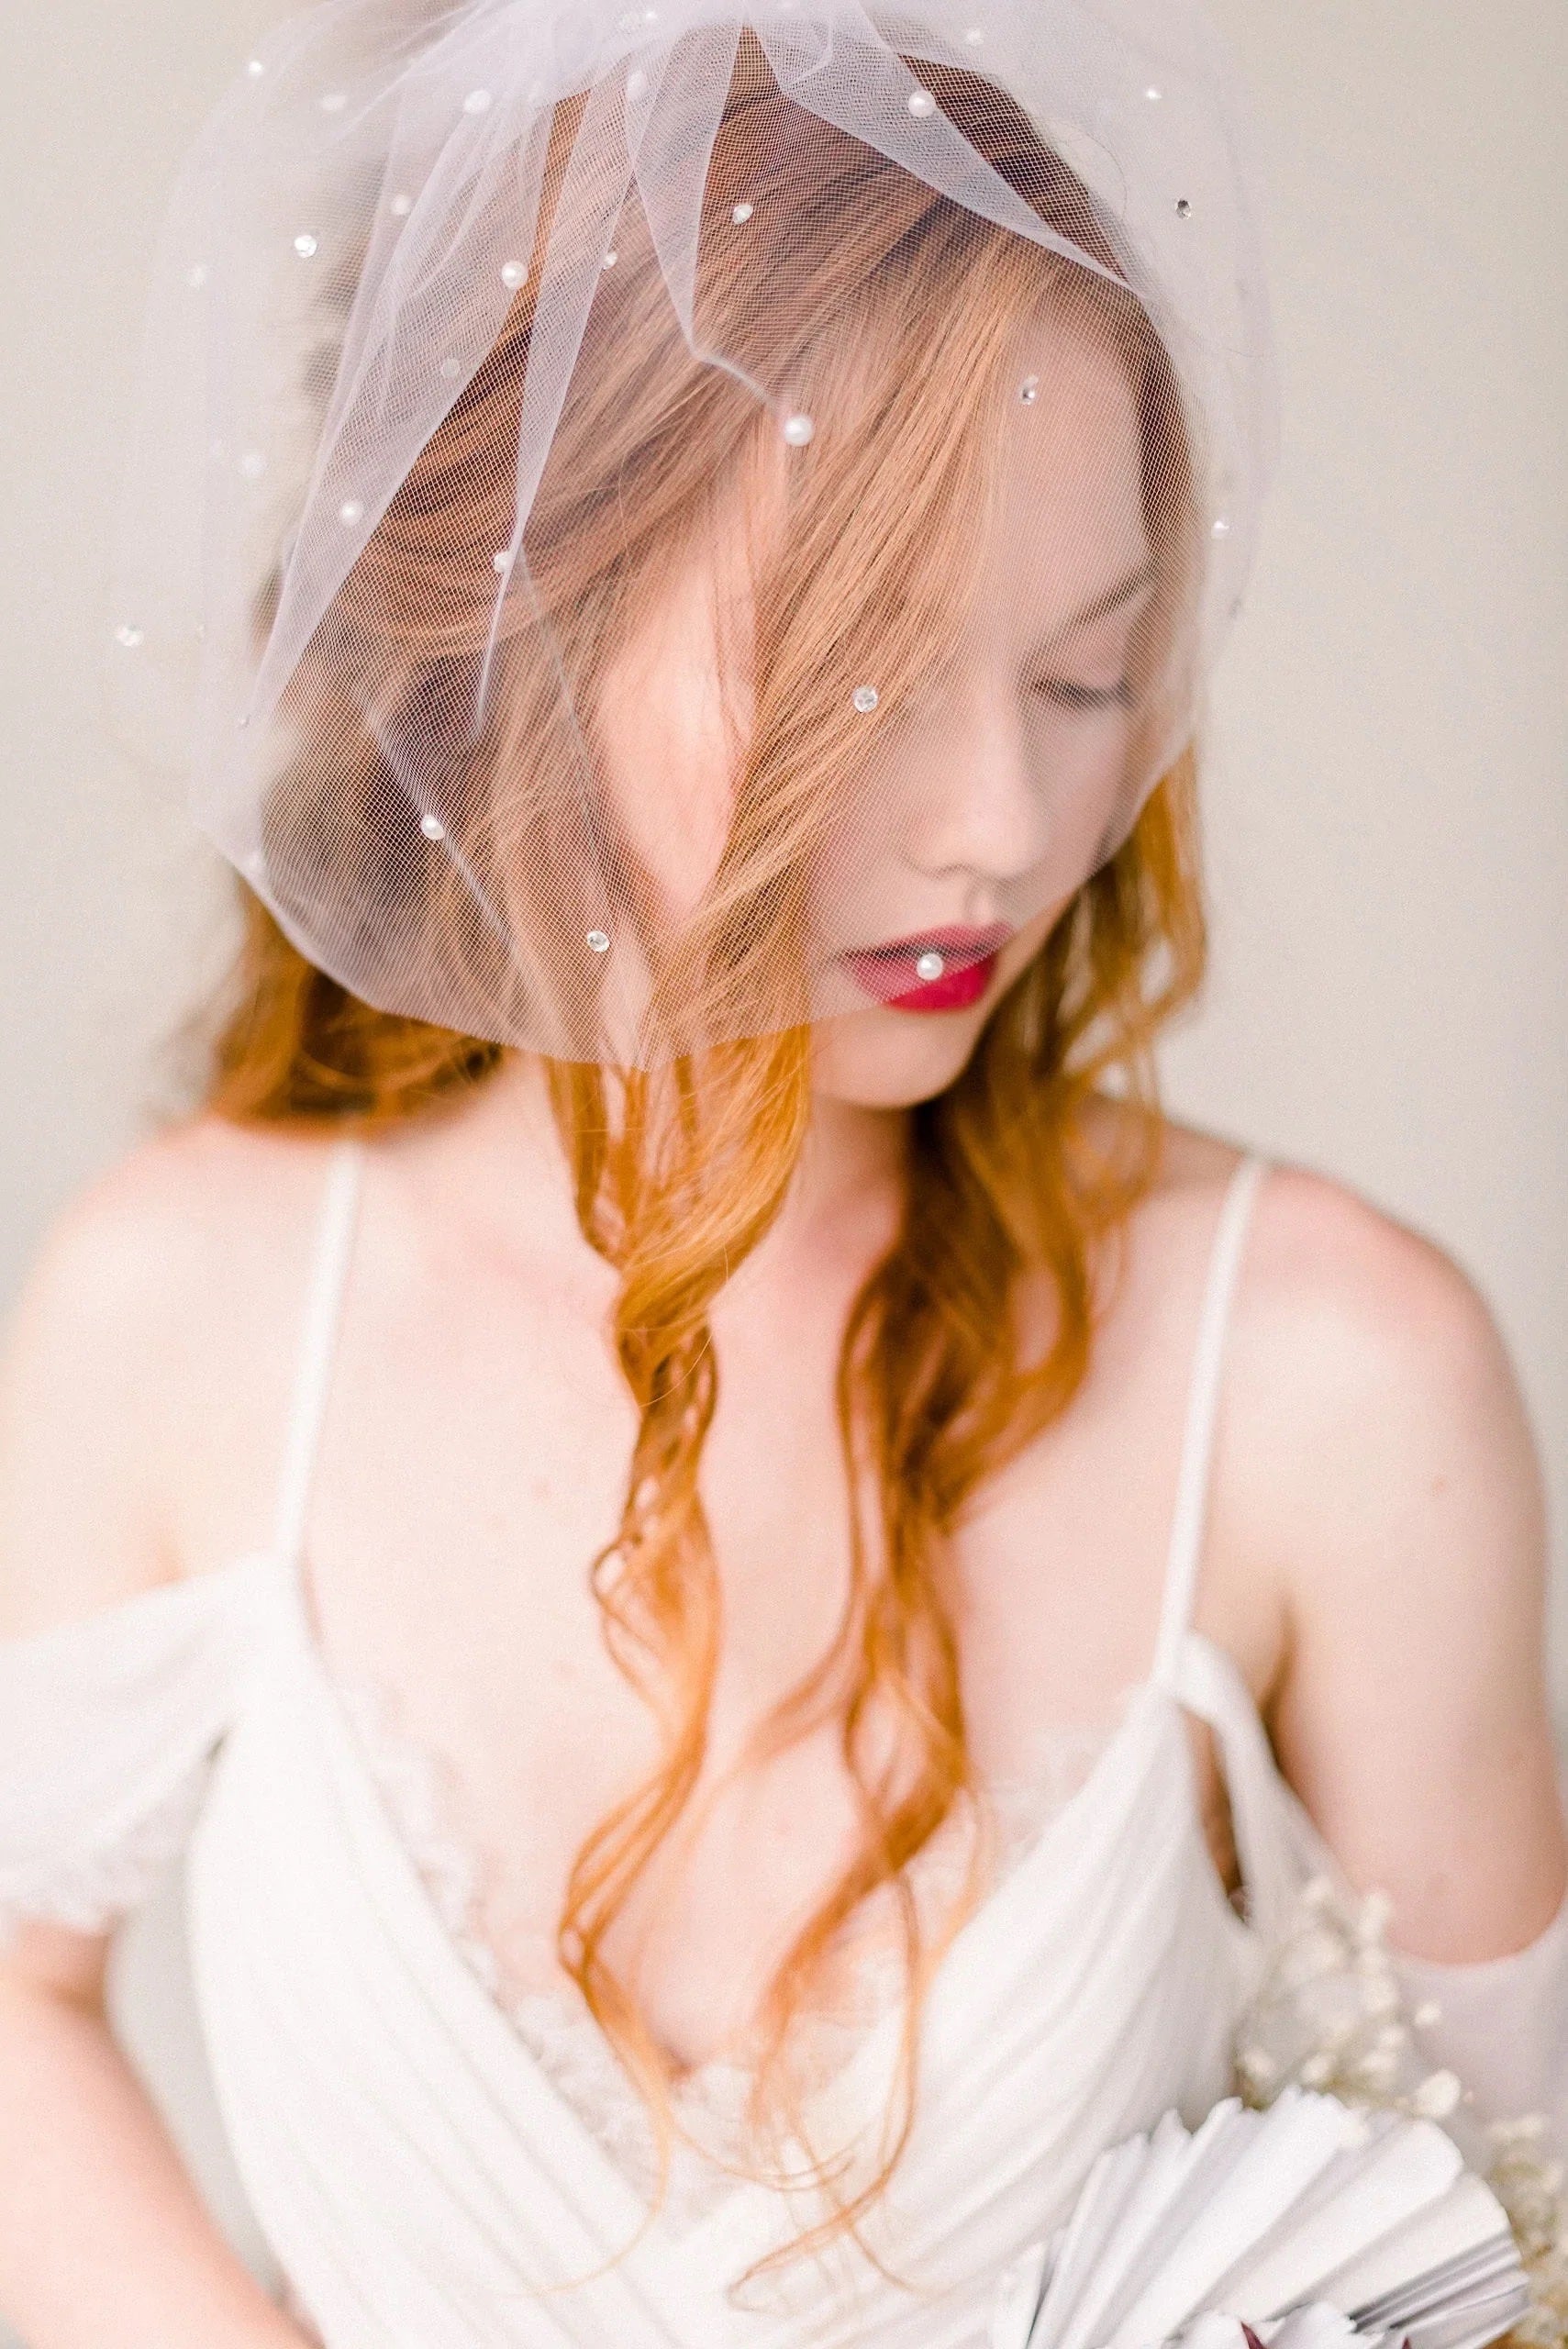 Lace and flower Birdcage Veil in Ivory with Pearls - Be Something New